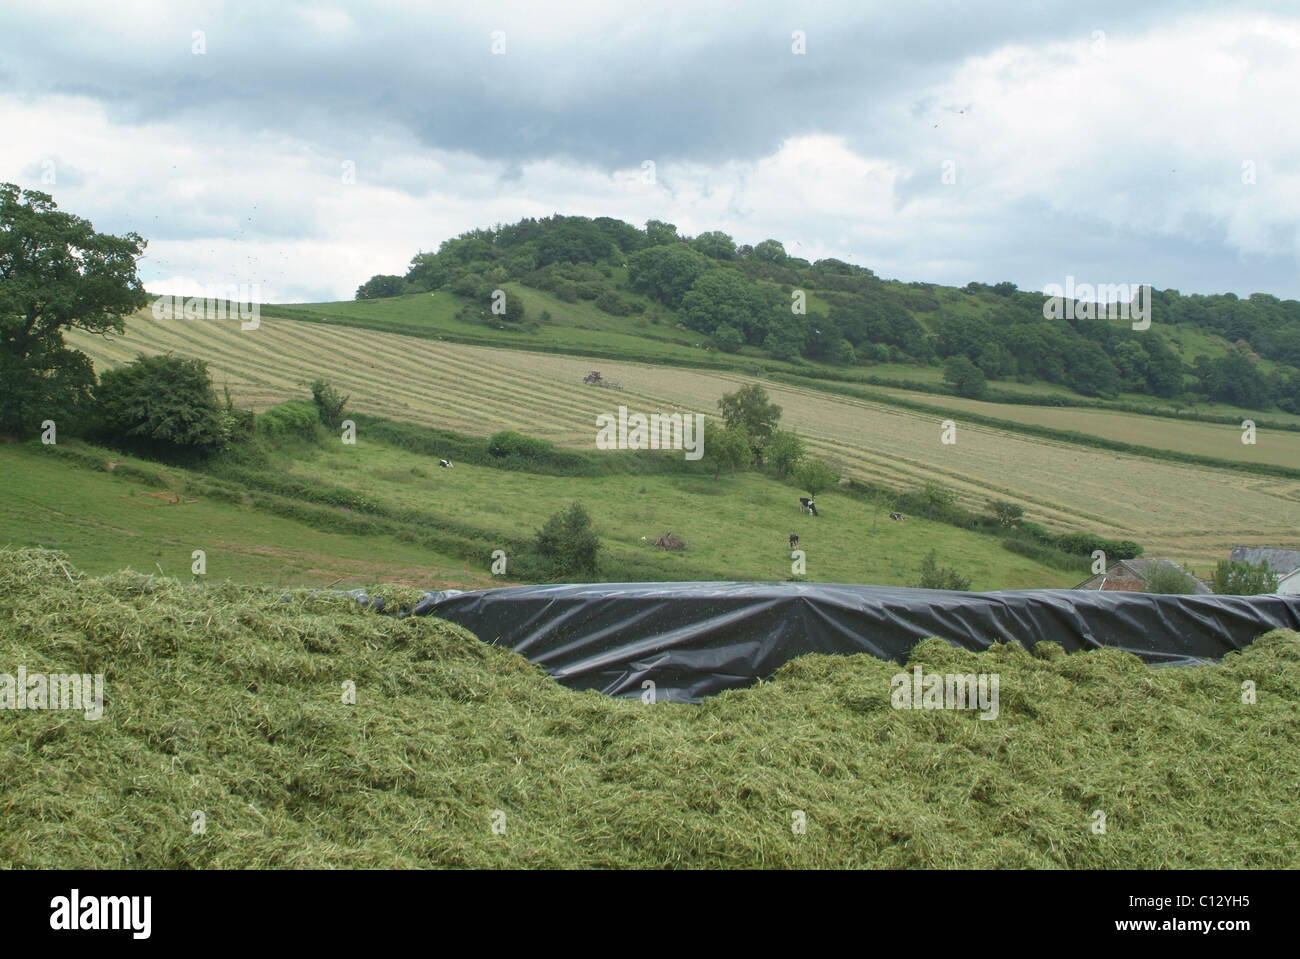 Silage pit with a view of a tractor turning grass for silage in the background Stock Photo